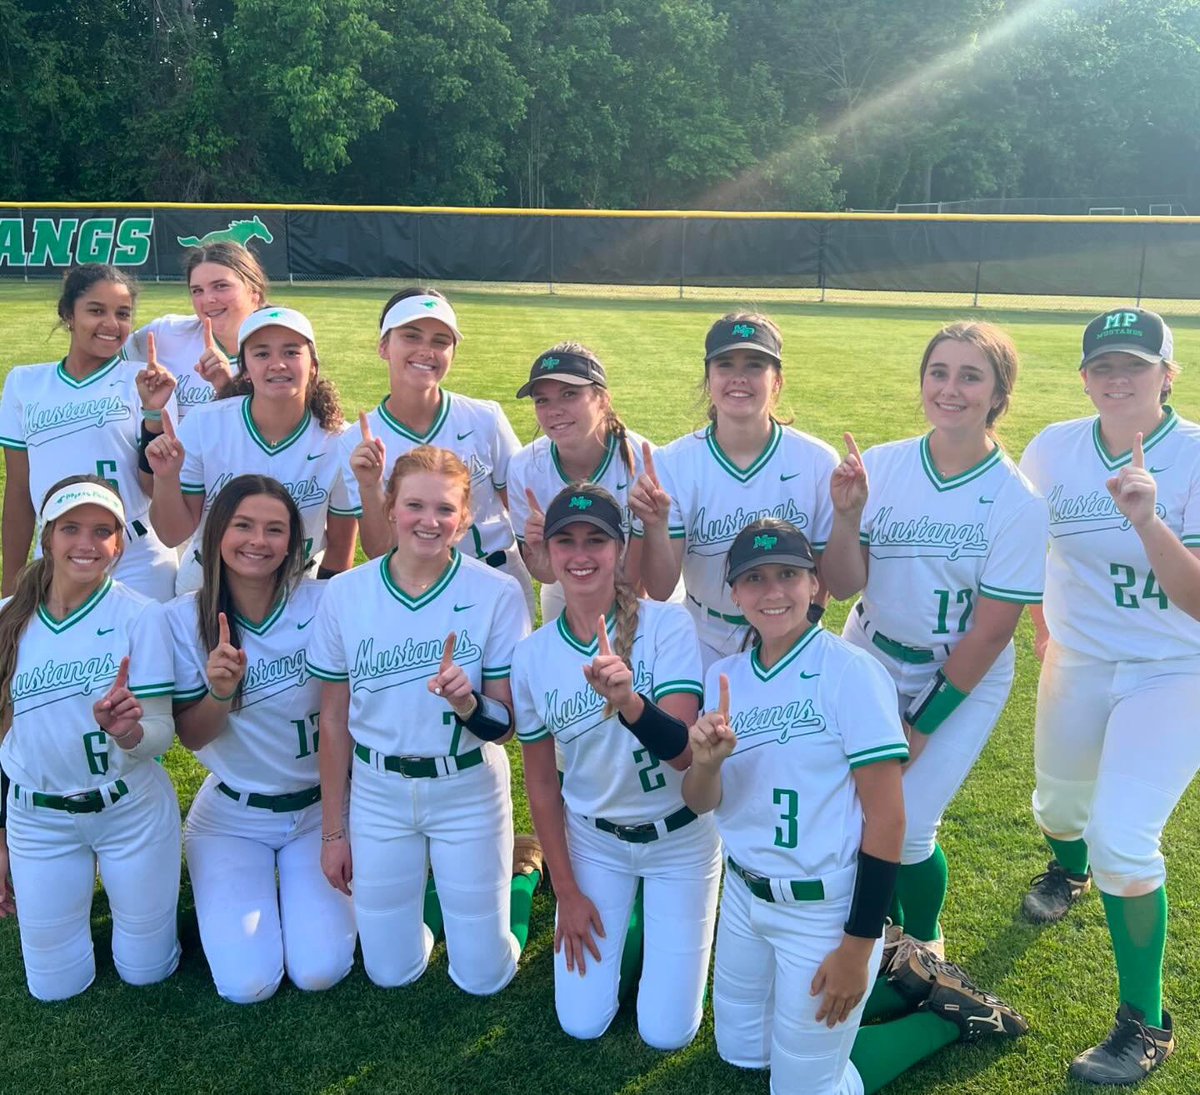 First Varsity start on the Mound for a Shut-Out and #4 OVER the fence HR!!! Did I mention - SoMeck 4A Conference CHAMPS!? #CockandLoad #YouKnow @TheParkSoftball @mp_stangsclub @TeamTrifecta16 @banditsnccausby @ExtraInningSB @LegacyLegendsS1 @SBRRetweets